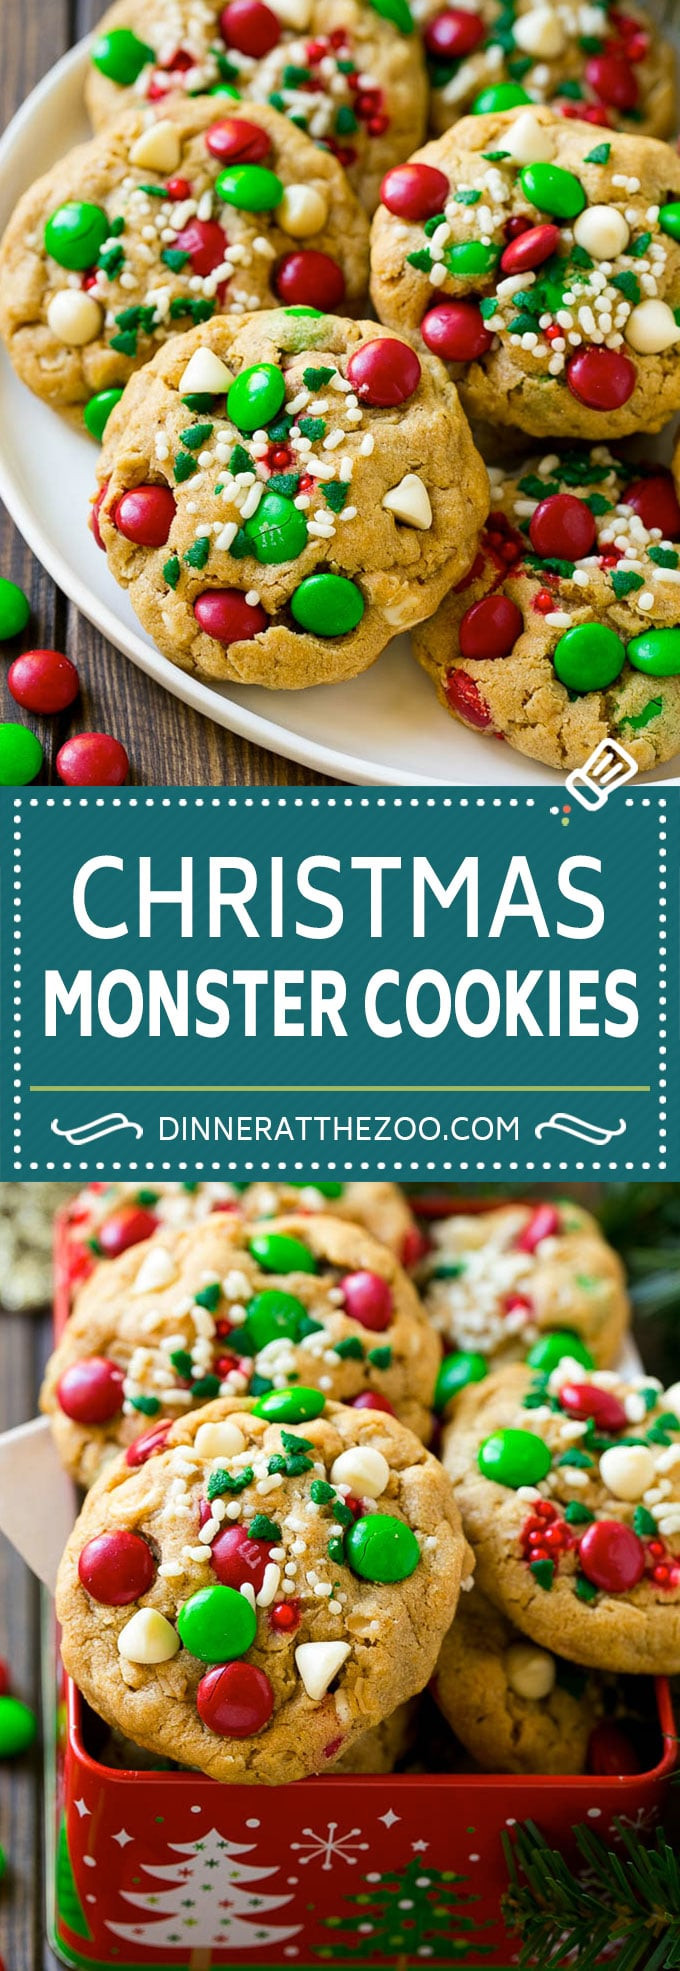 Christmas Oatmeal Cookies
 Monster Cookies Christmas Version Dinner at the Zoo